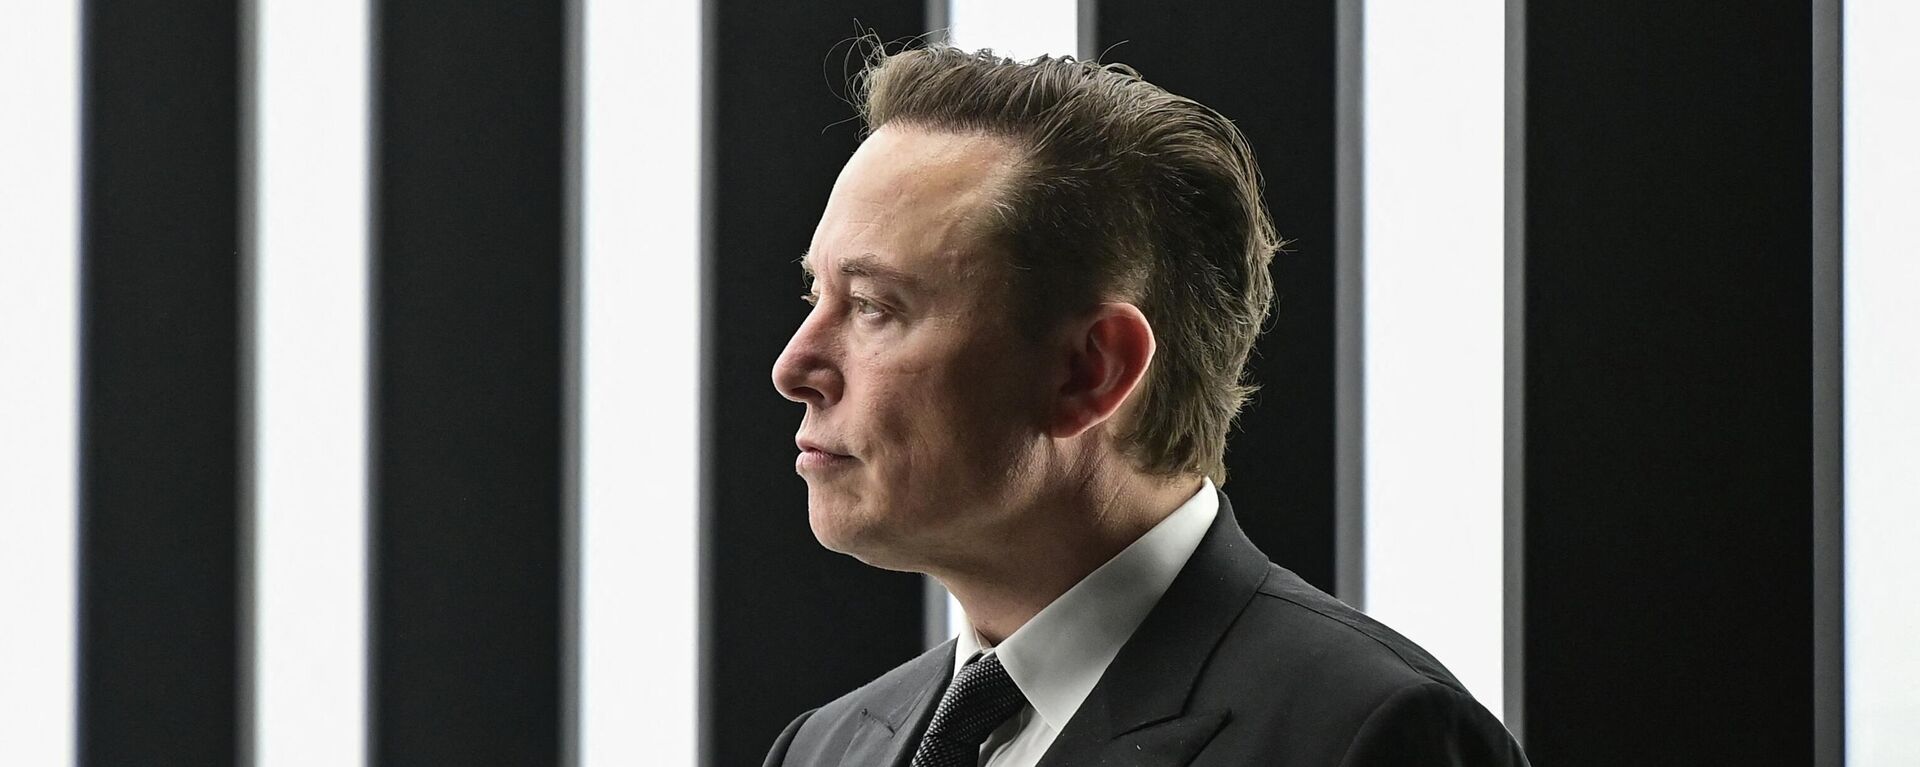 (FILES) In this file photo taken on March 22, 2022, Tesla CEO Elon Musk is pictured as he attends the start of the production at Tesla's Gigafactory in Gruenheide, southeast of Berlin - Sputnik International, 1920, 27.04.2022